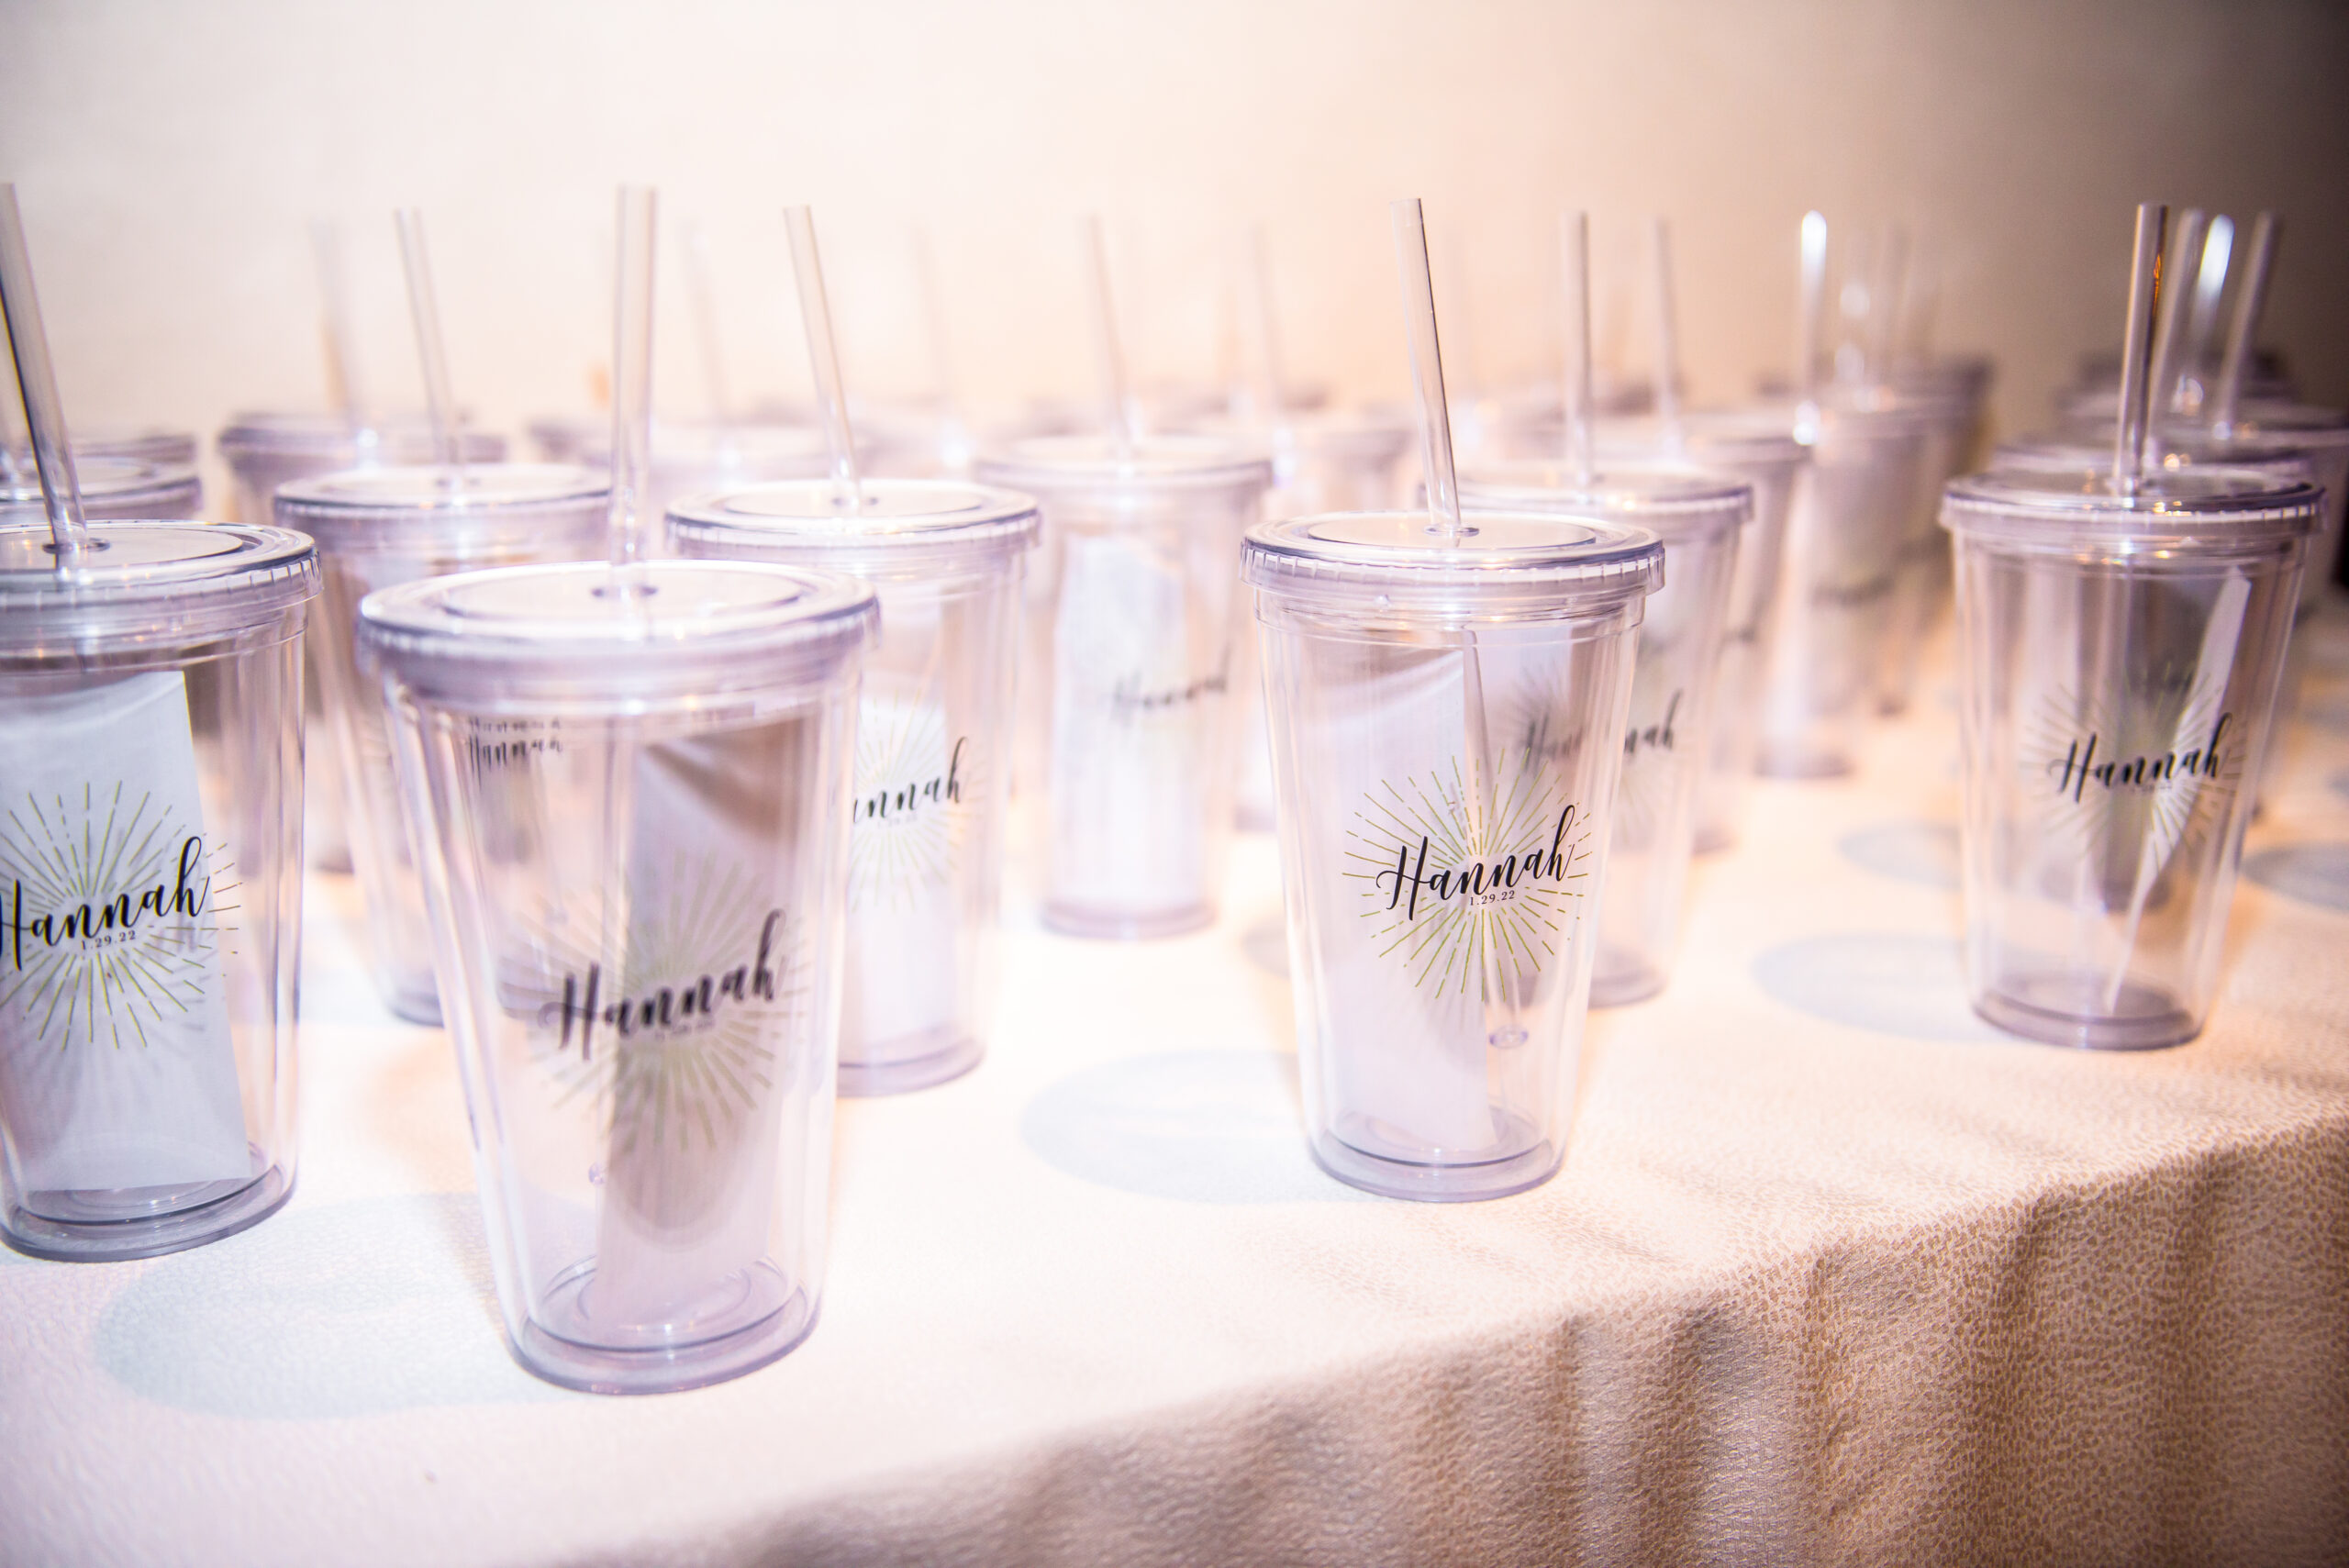 Water tumbler favors at Hannah's Sophisticated Bat Mitzvah Soiree at Eaton DC | Pop Color Events | Adding a Pop of Color to Bar & Bat Mitzvahs in DC, MD & VA | Photo by: Jacie Lee Almira Photography